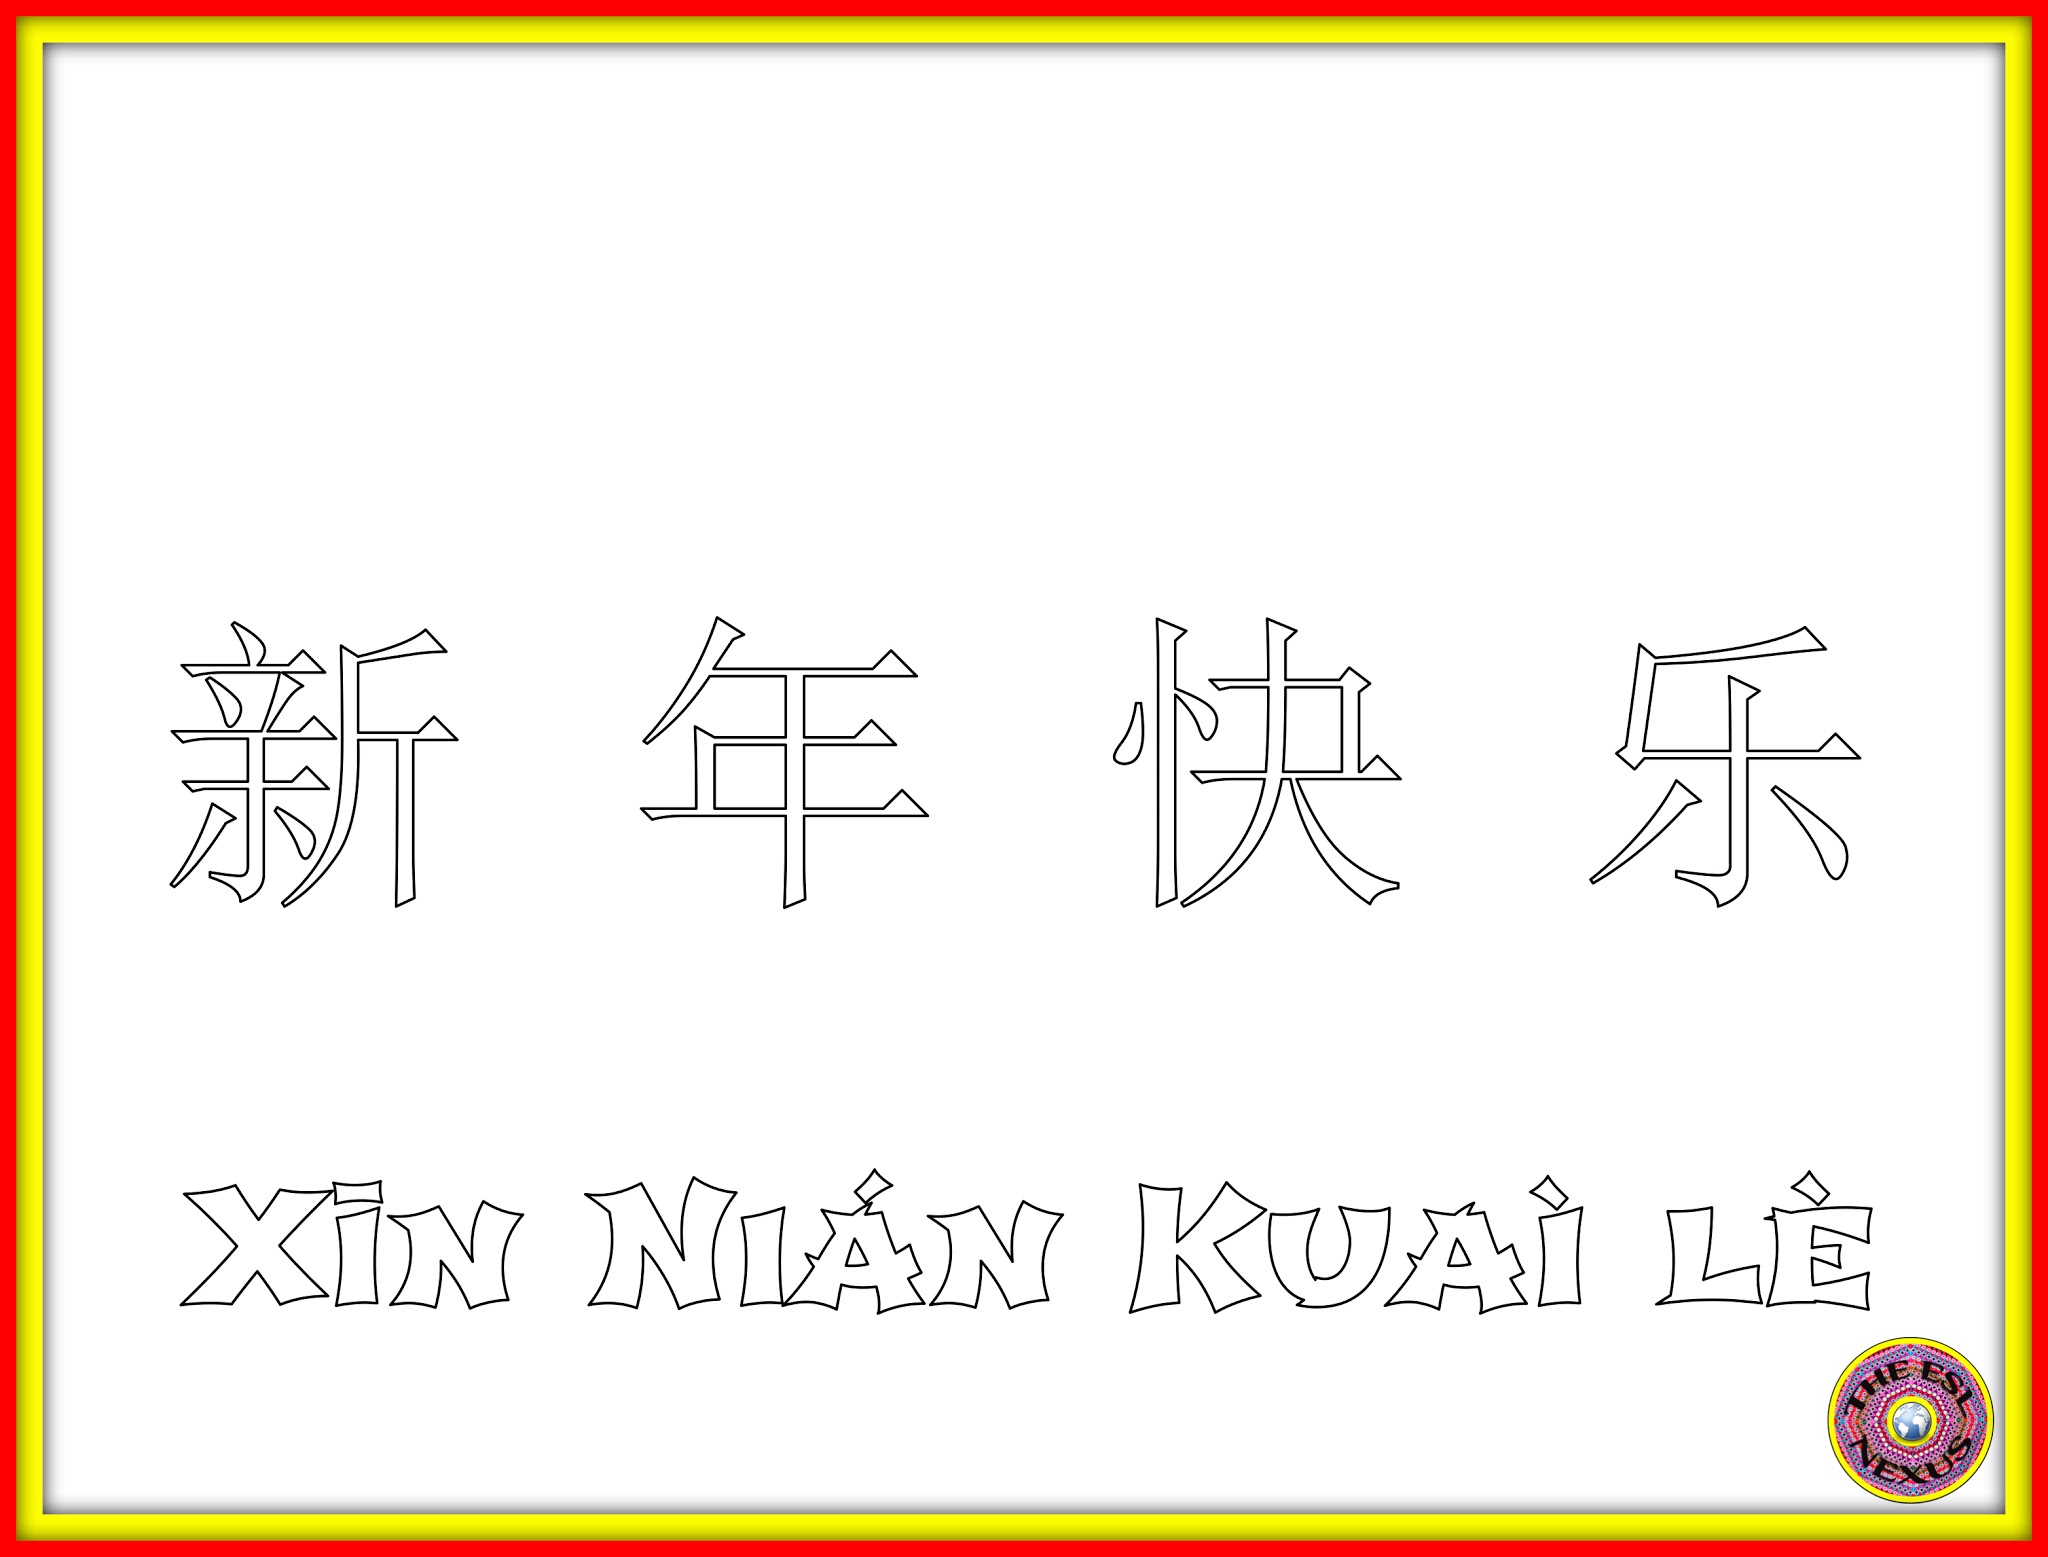 Image of outline of the Mandarin phrase in Chinese characters and Pinyin